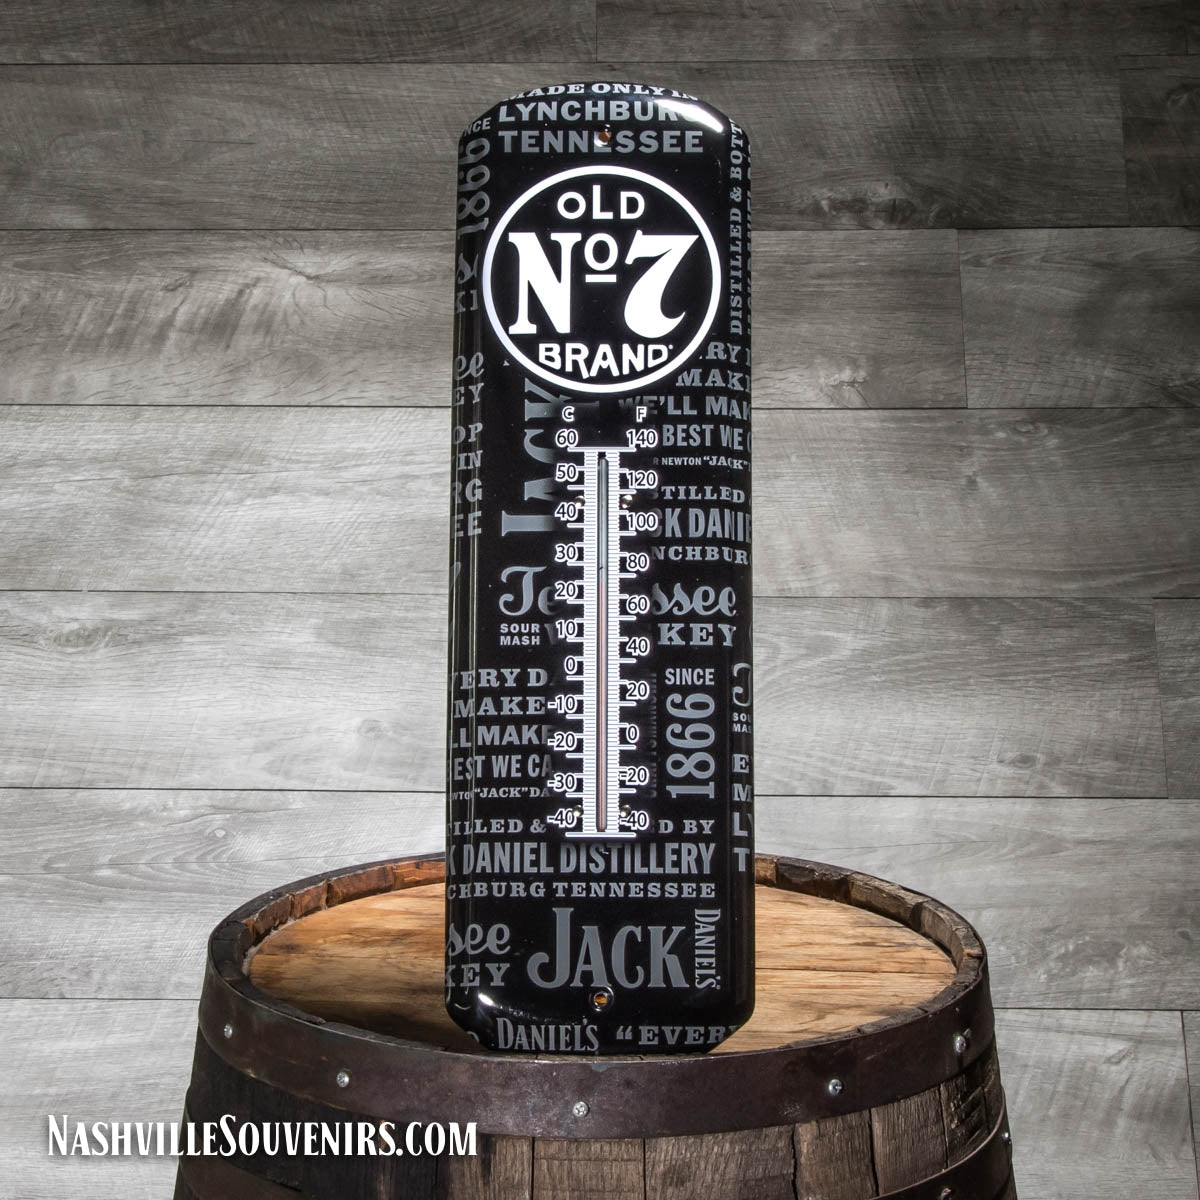 Dress up the home bar with this Jack Daniel's Old No.7 thermometer. This Old No.7 brand thermometer makes a great gift if you're looking for man cave wall ideas.